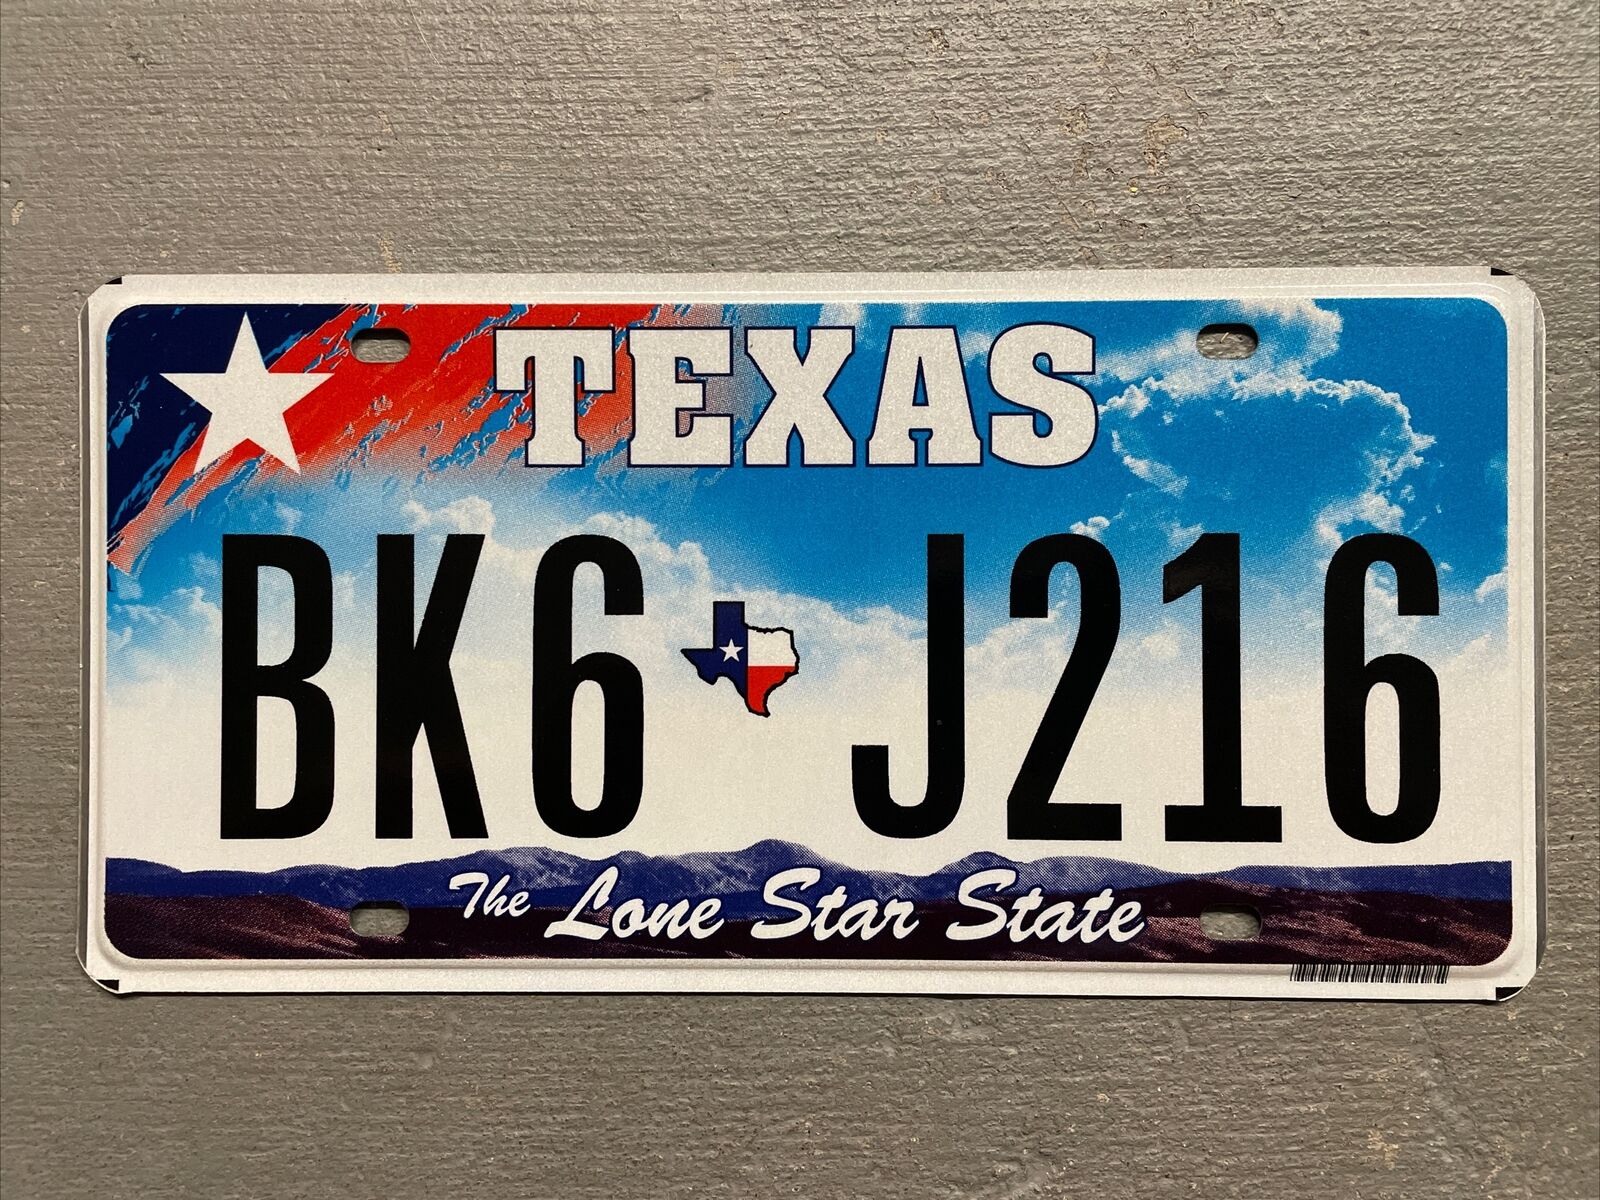 EXPIRED TEXAS LICENSE PLATE THE LONE STAR STATE  RANDOM LETTERS/NUMBERS MINT